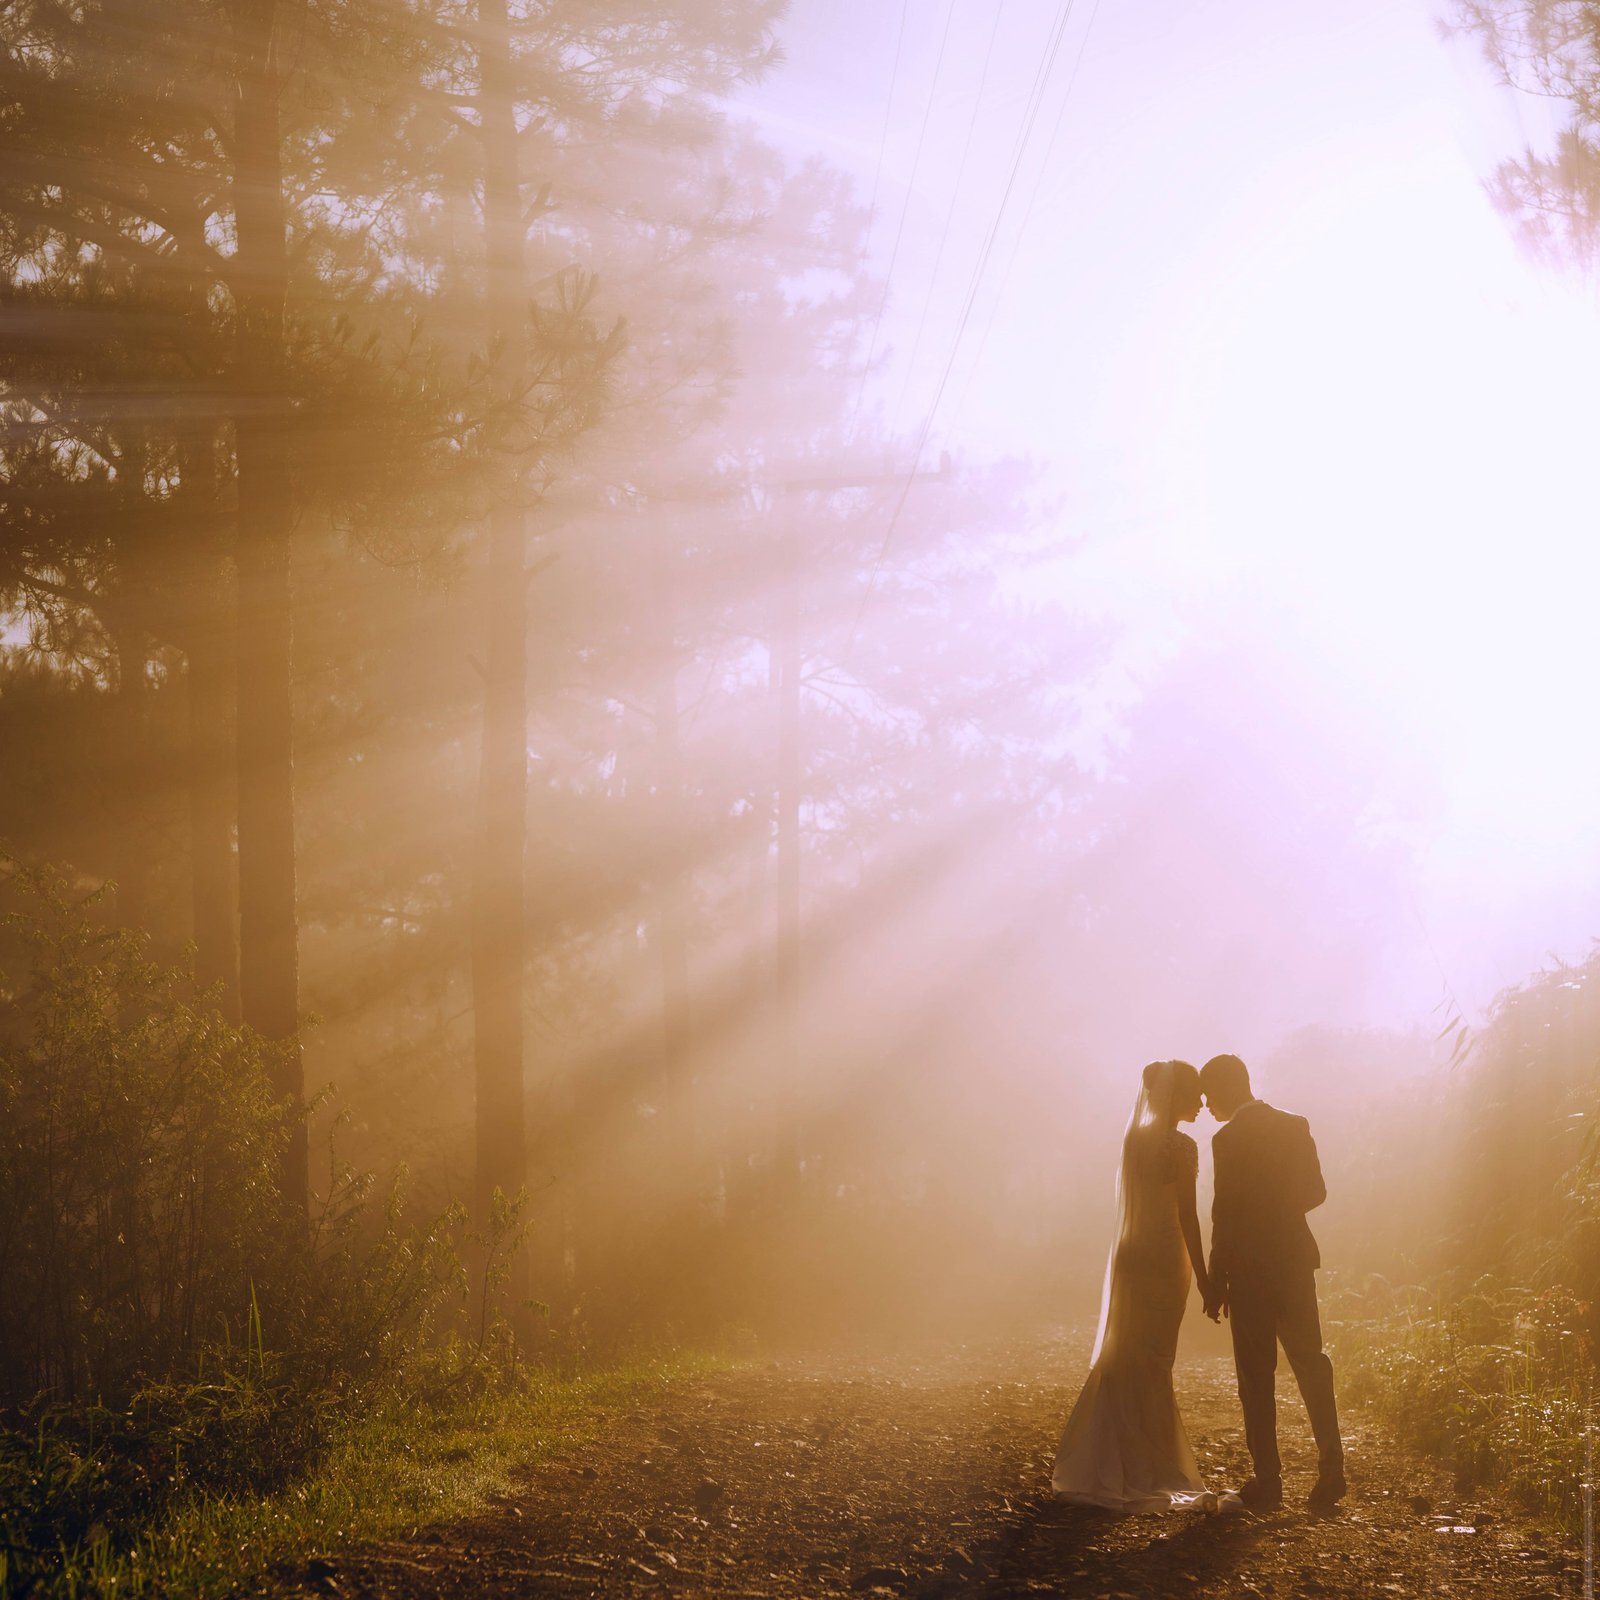 Wedding couple in the woods with dazzling sunshine - Camellio Wedding Planning and Events - Essex Wedding Planner